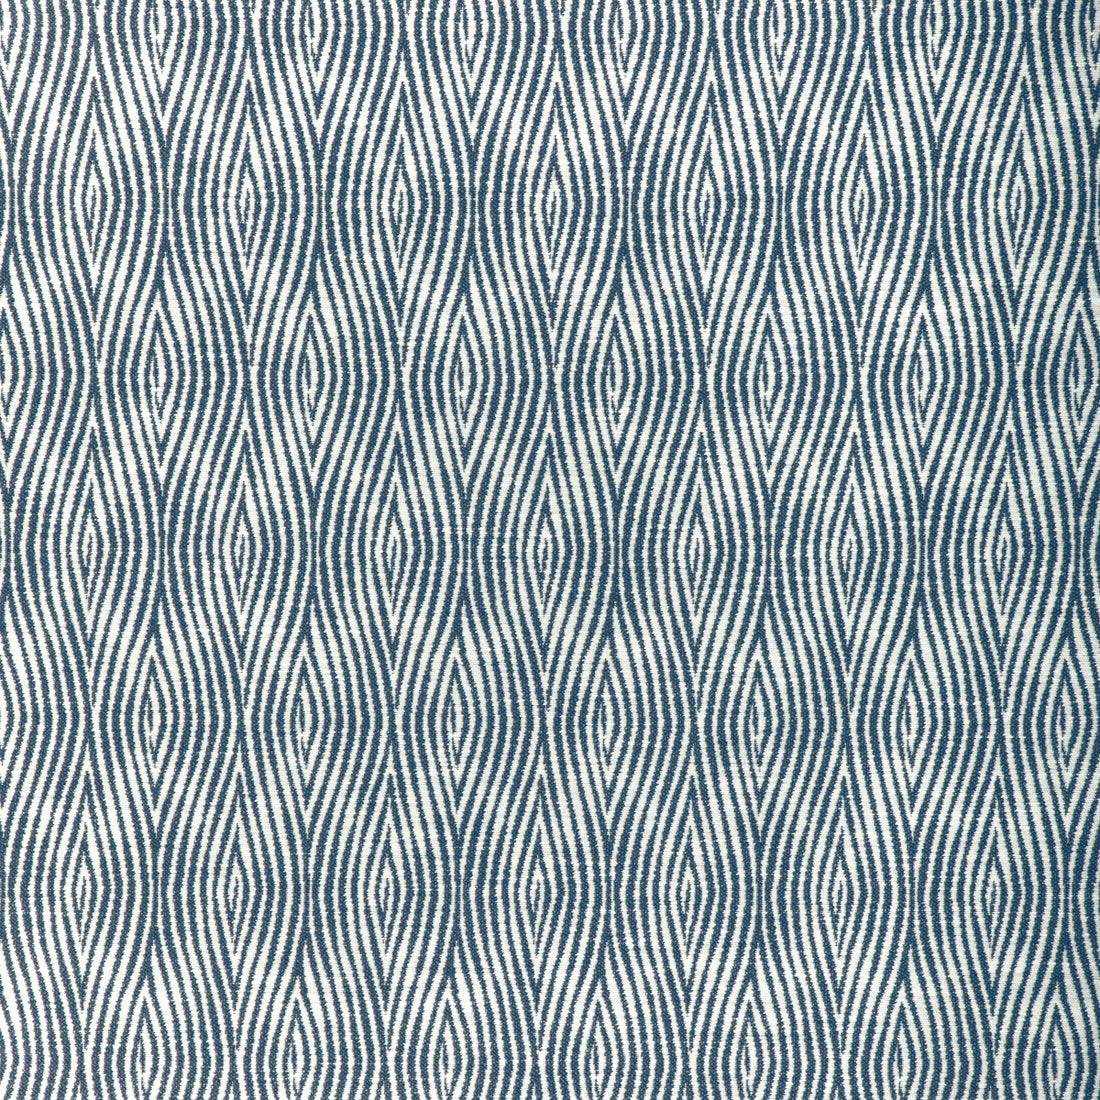 Vertical Motion fabric in navy color - pattern 37059.51.0 - by Kravet Design in the Thom Filicia Latitude collection